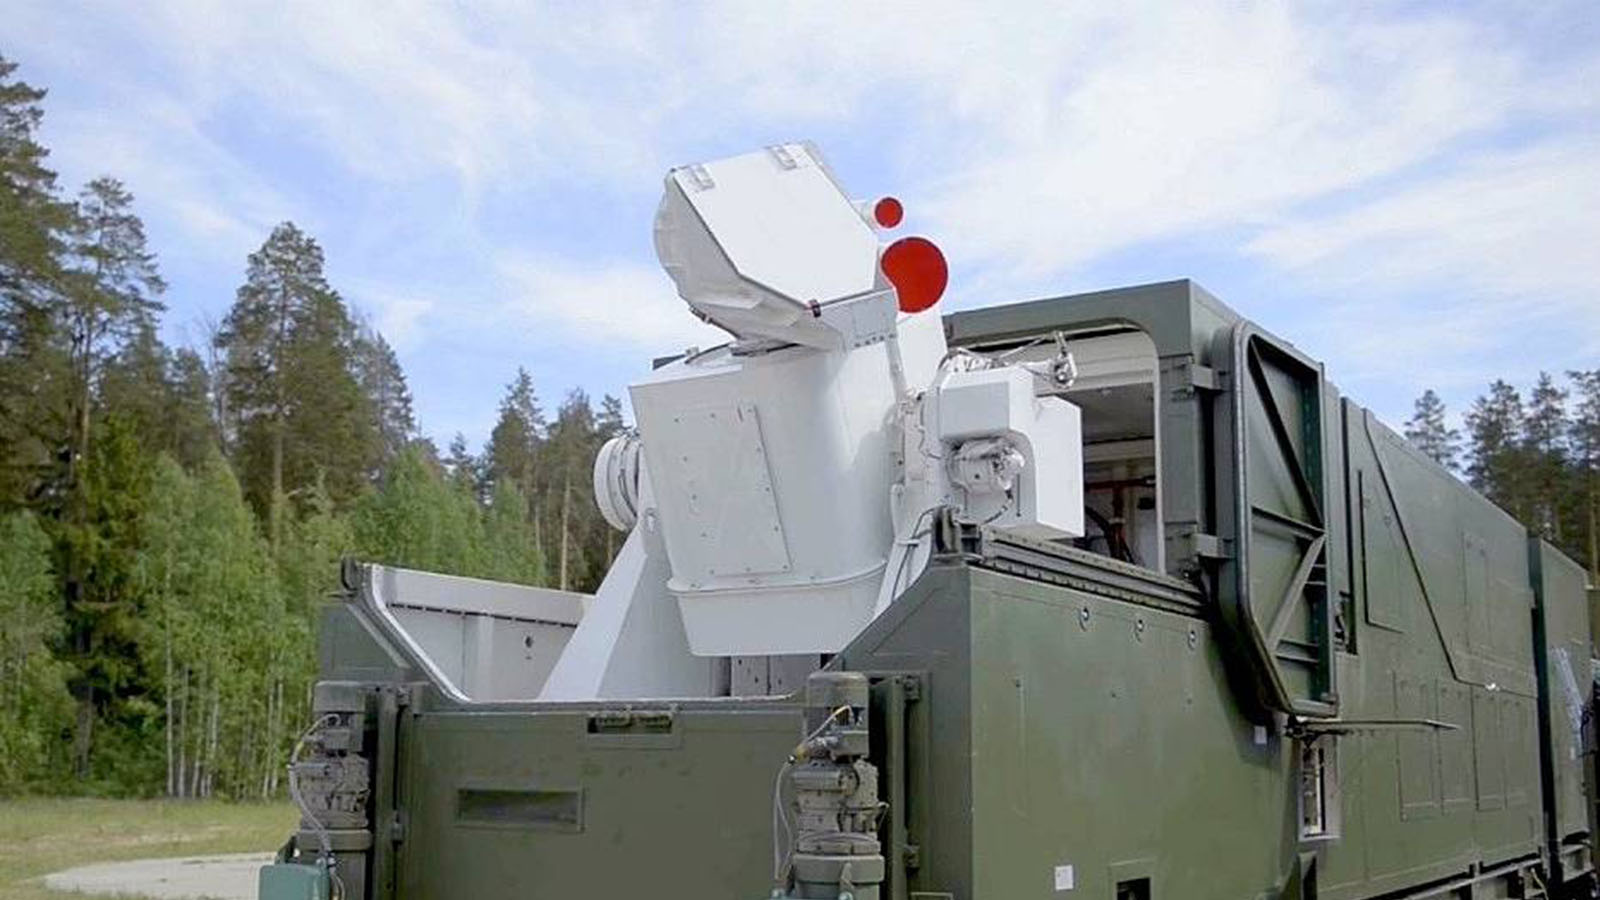 Don’t be dazzled by Russia’s laser weapons claims: Experts